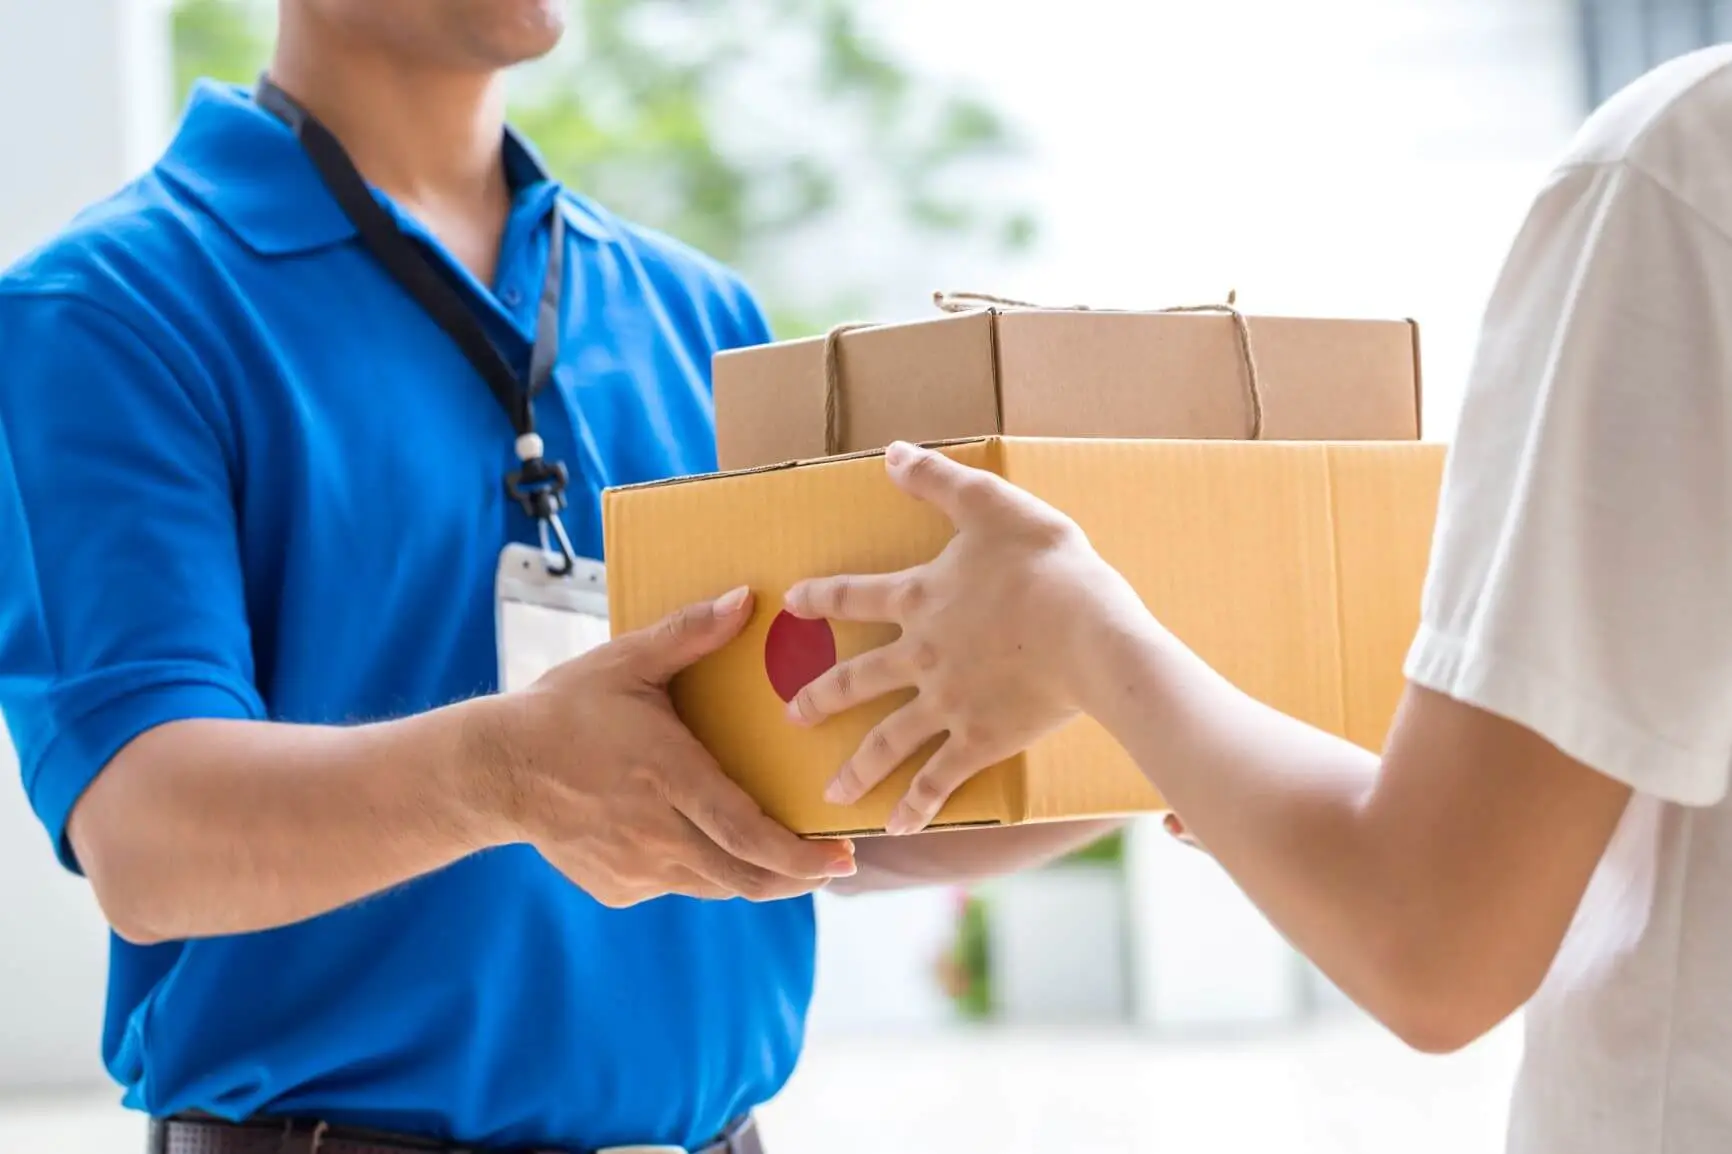 With more than two decades of small parcel shipping and software/technology experience, we can help your business with all aspects of your shipping and logistics. The best part is Parcel Consultants works to find your business the best shipping rates and carrier strategy available at no cost to you.